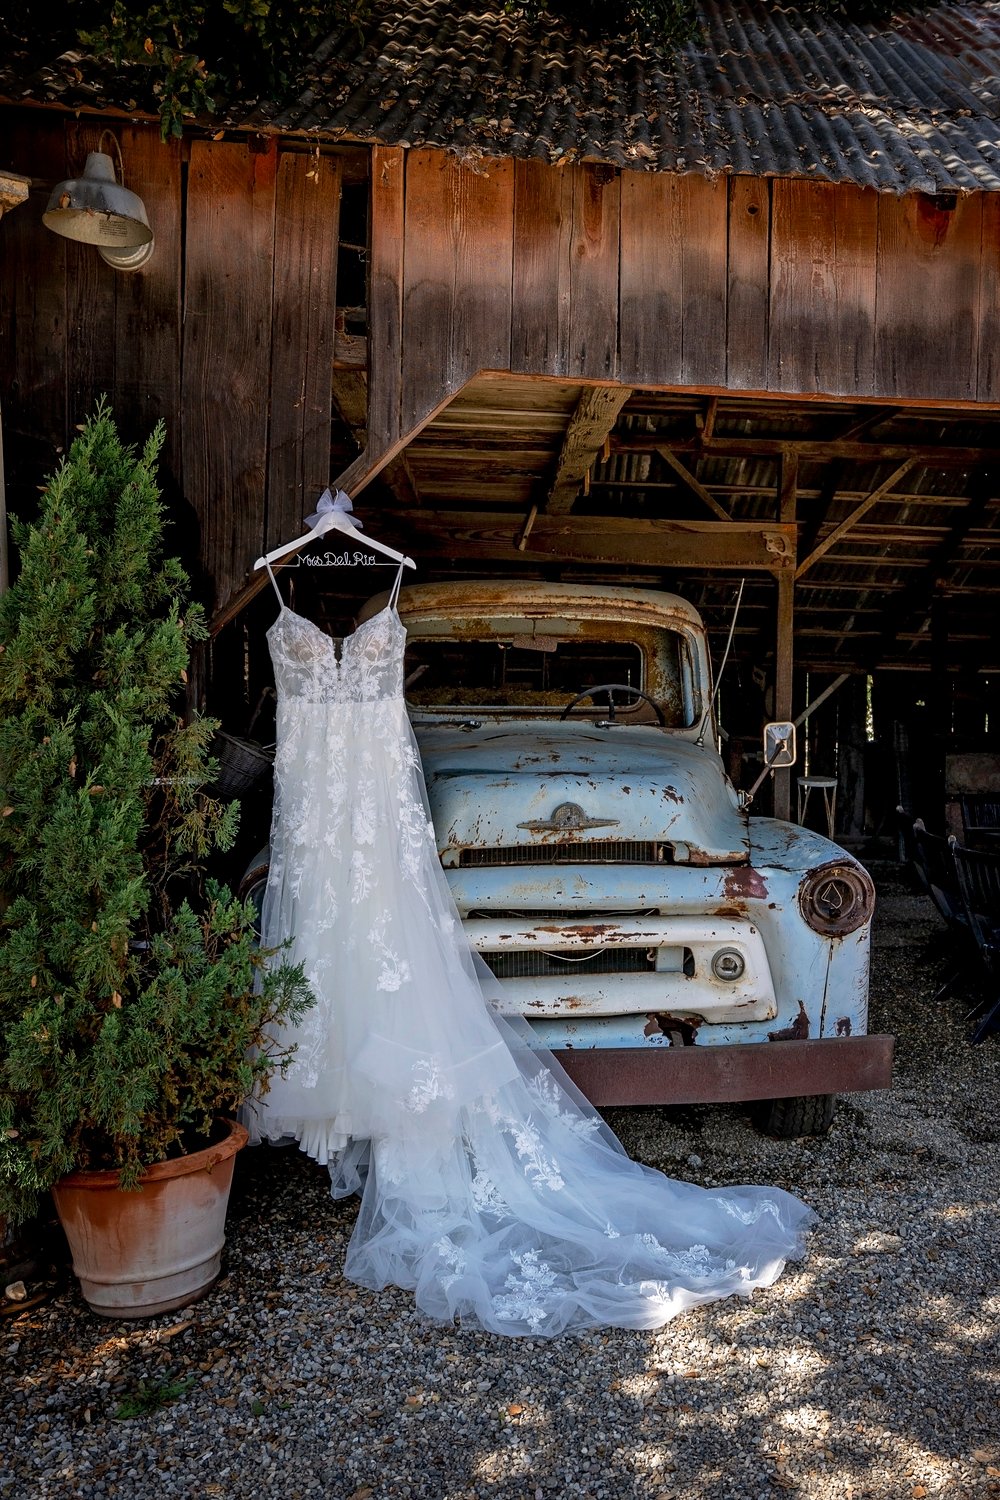 wedding dress hanging at a barn in front of a vintage truck